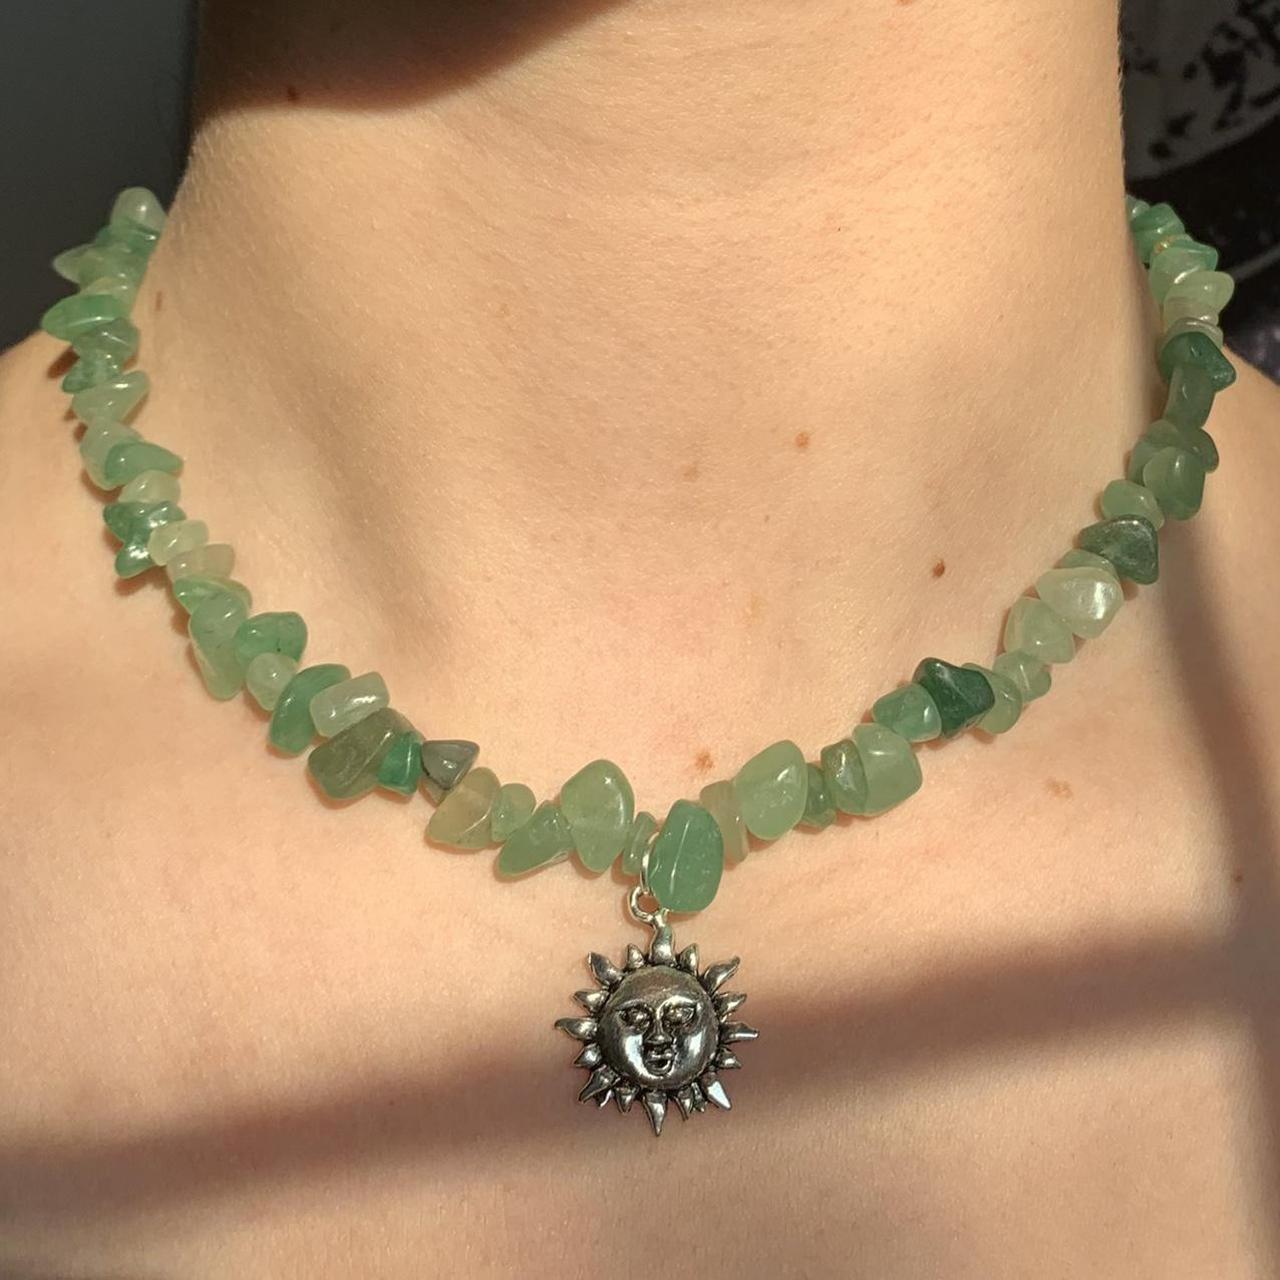 Women's Green and Silver Jewellery